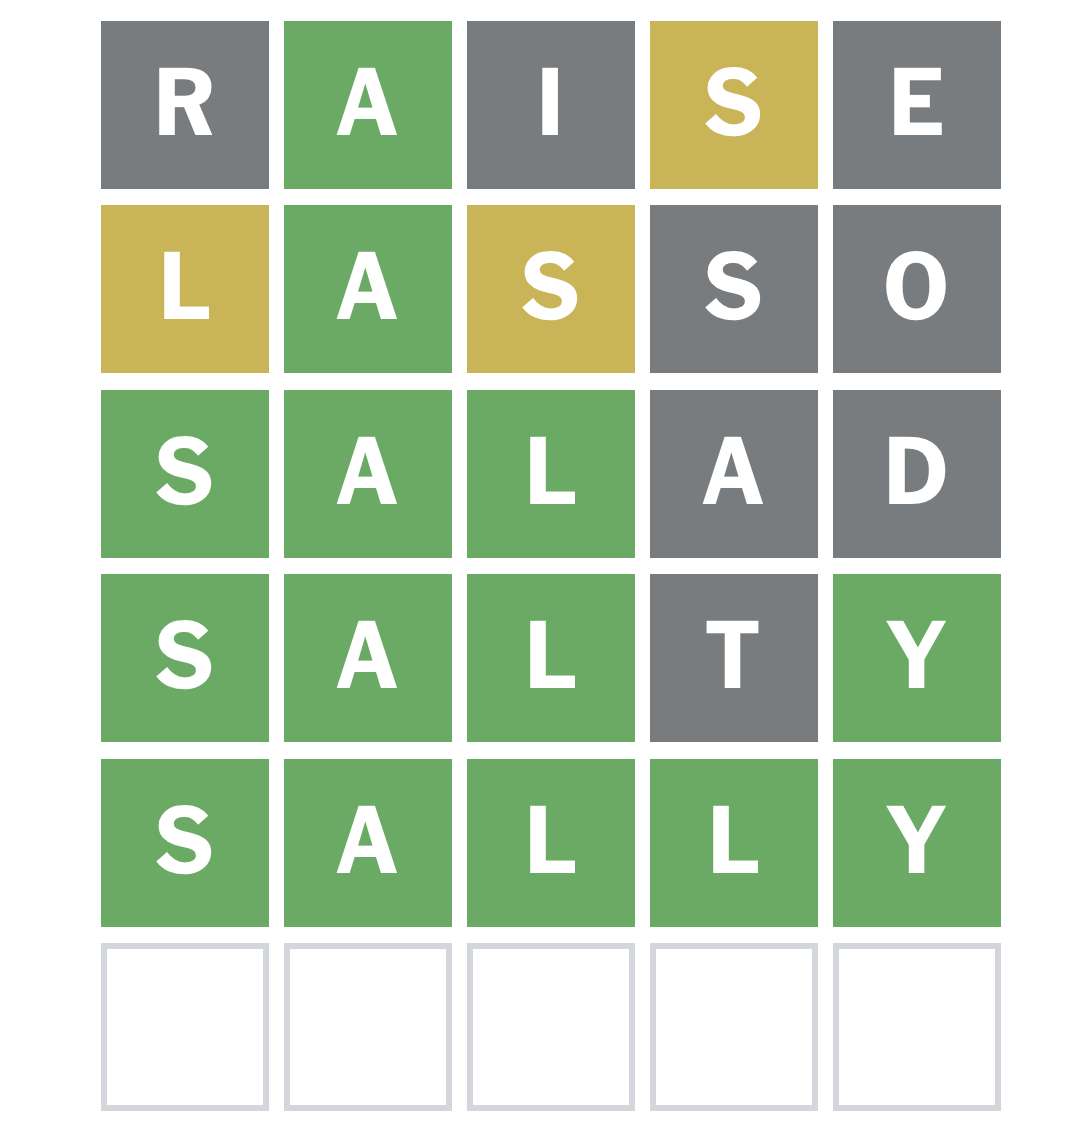 A wordl screenshot with the words: raise, lasso, salad, salty, sally